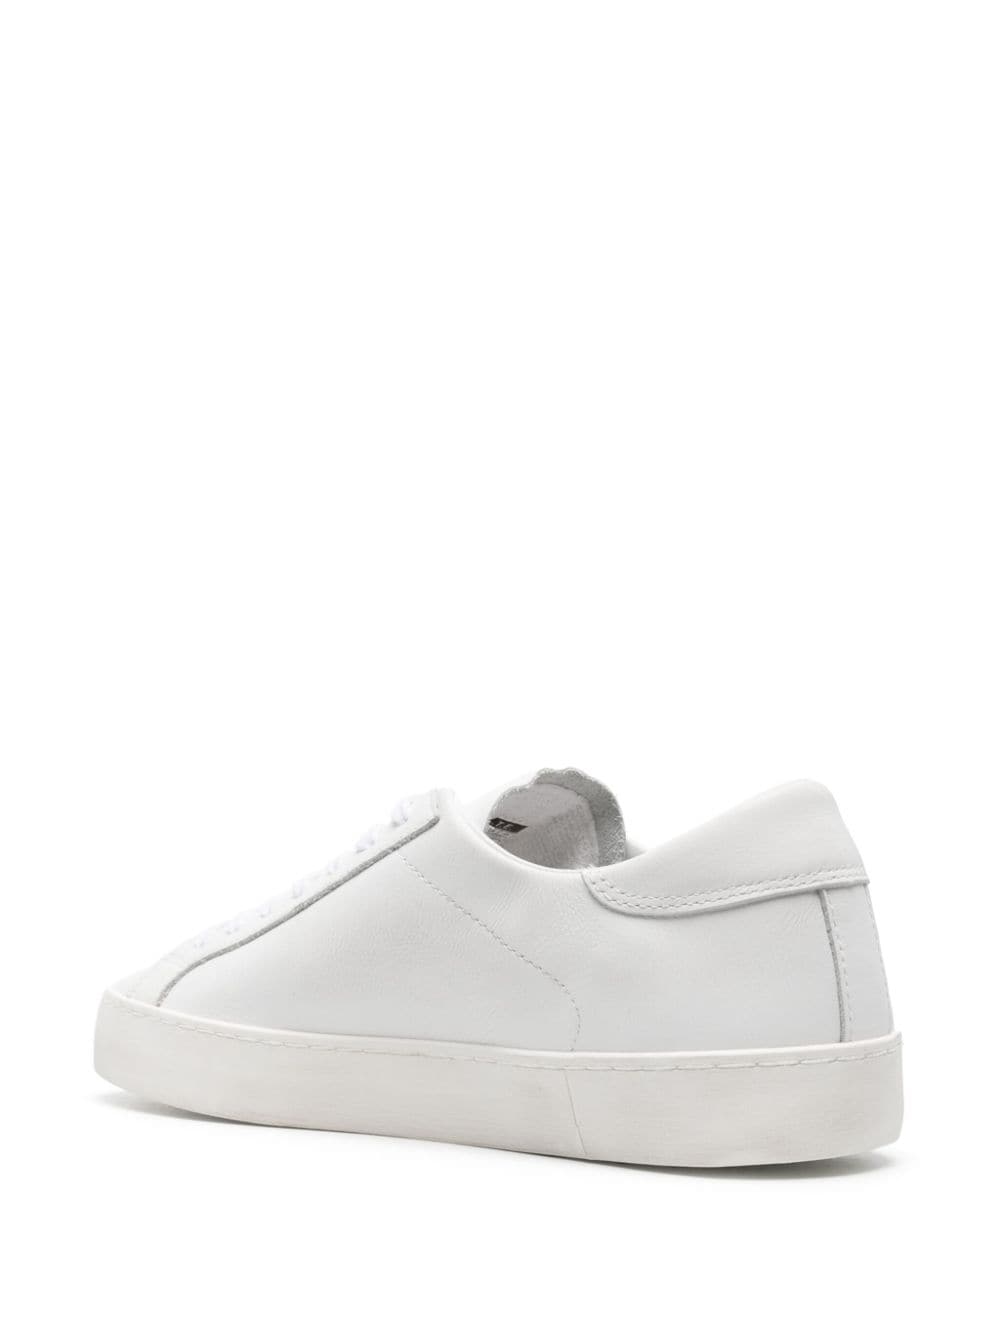 Shop Date Hill Low Leather Sneakers In White